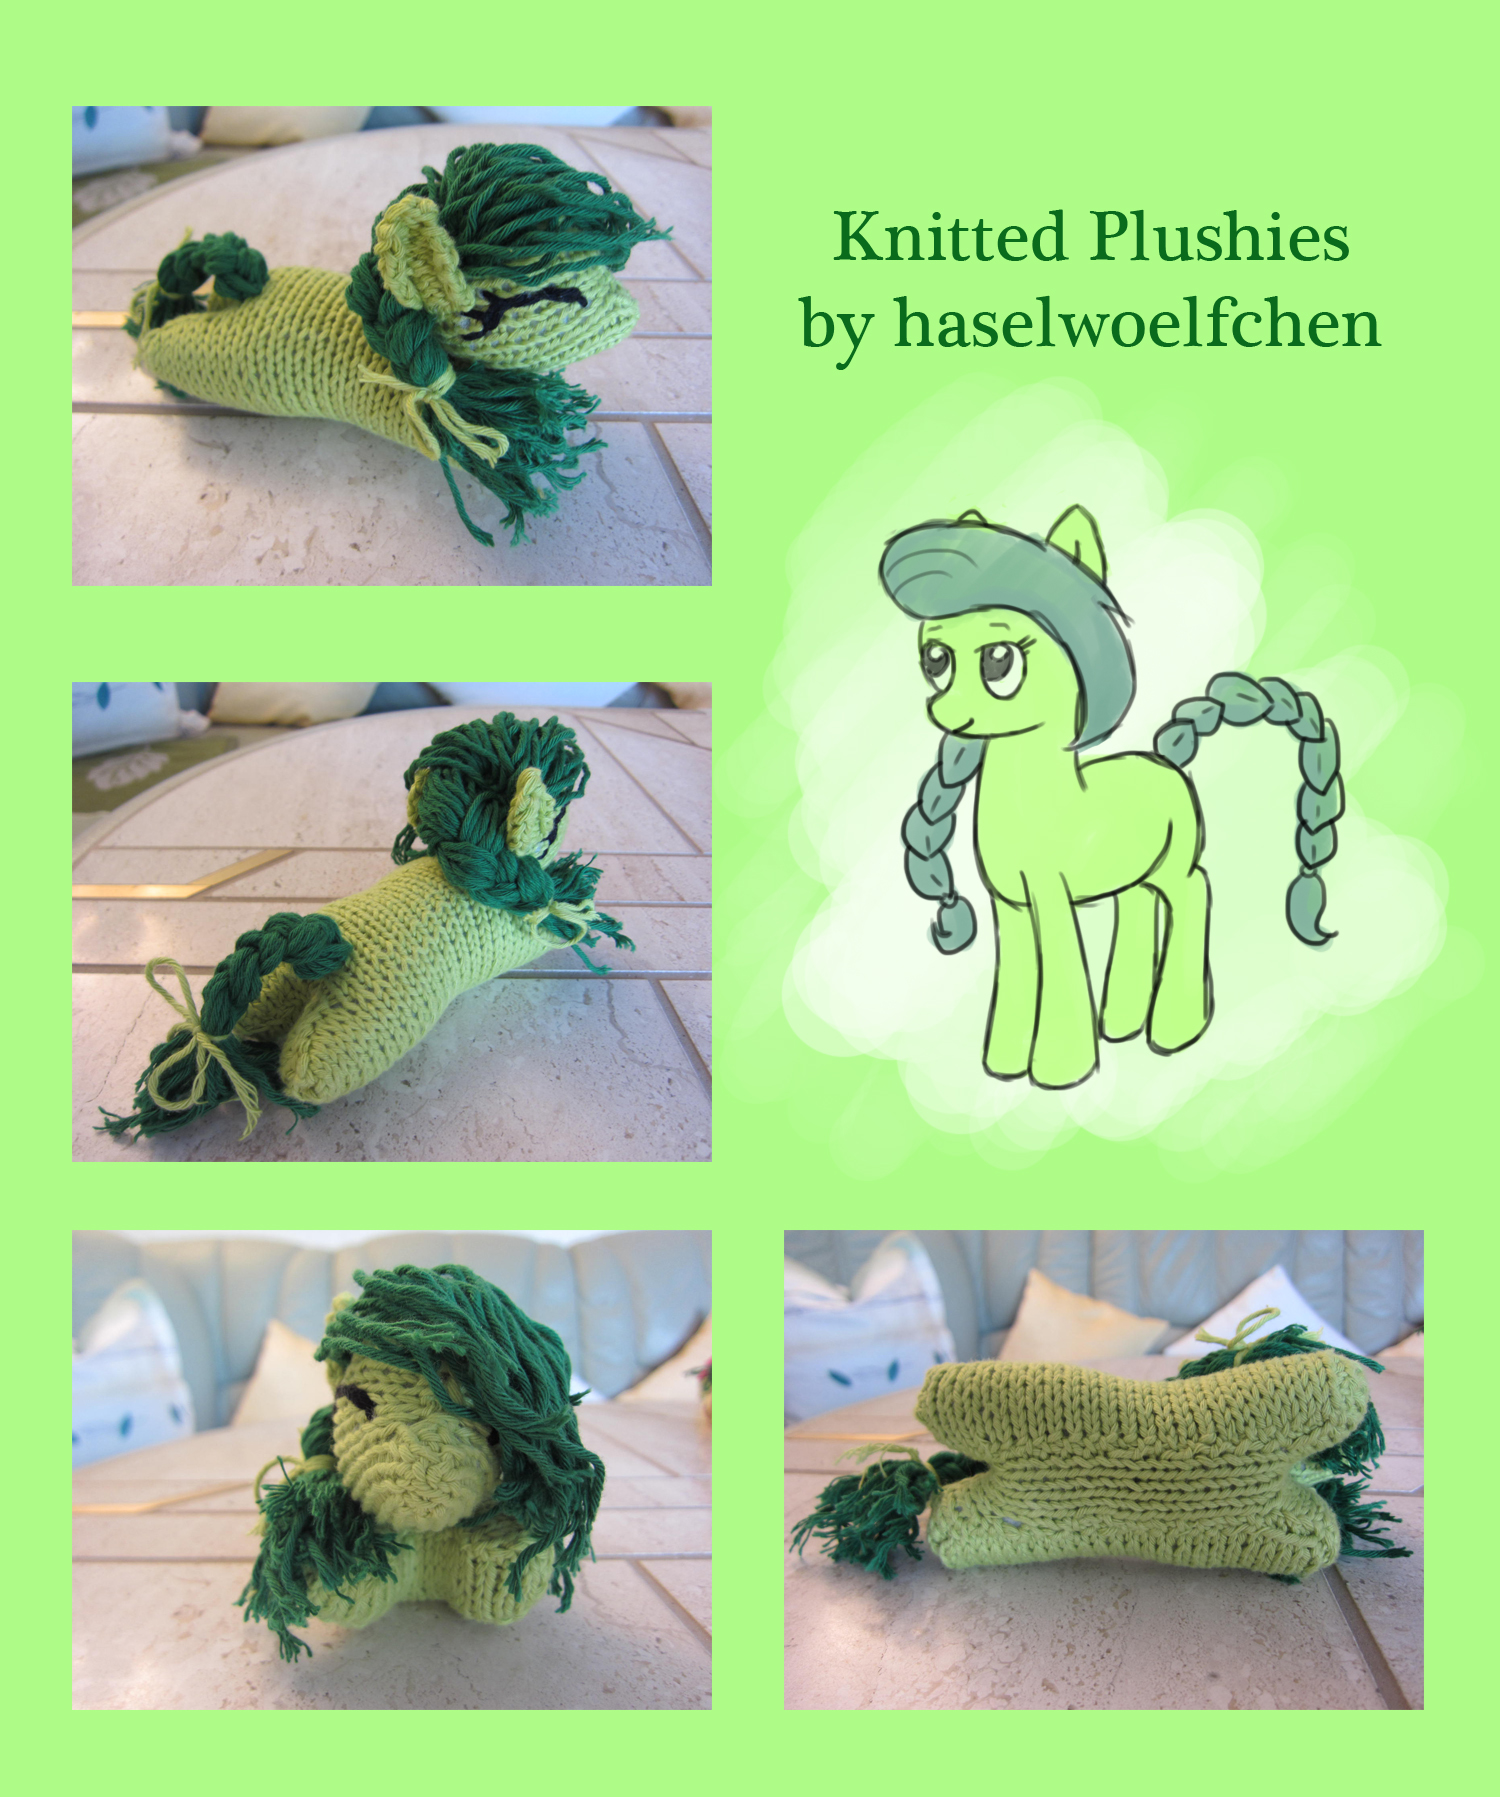 [Bild: new_knitted_pony_pattern_by_haselwoelfchen-d62ywc8.jpg]